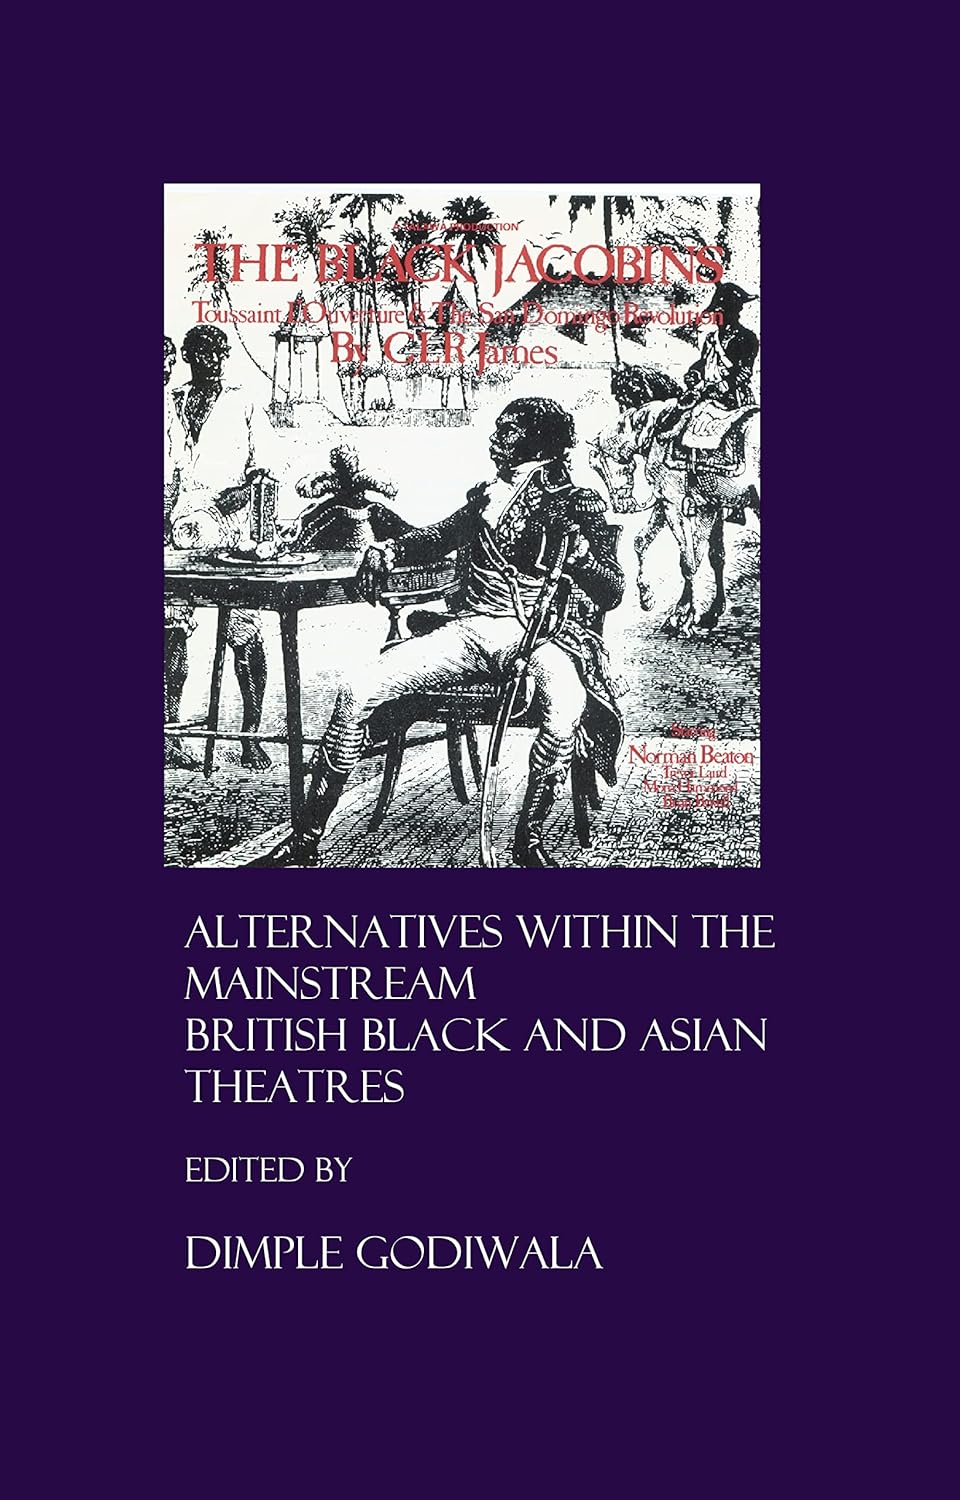 Alternatives Within the Mainstream: British Black and Asian Theatres: 1 - cover art